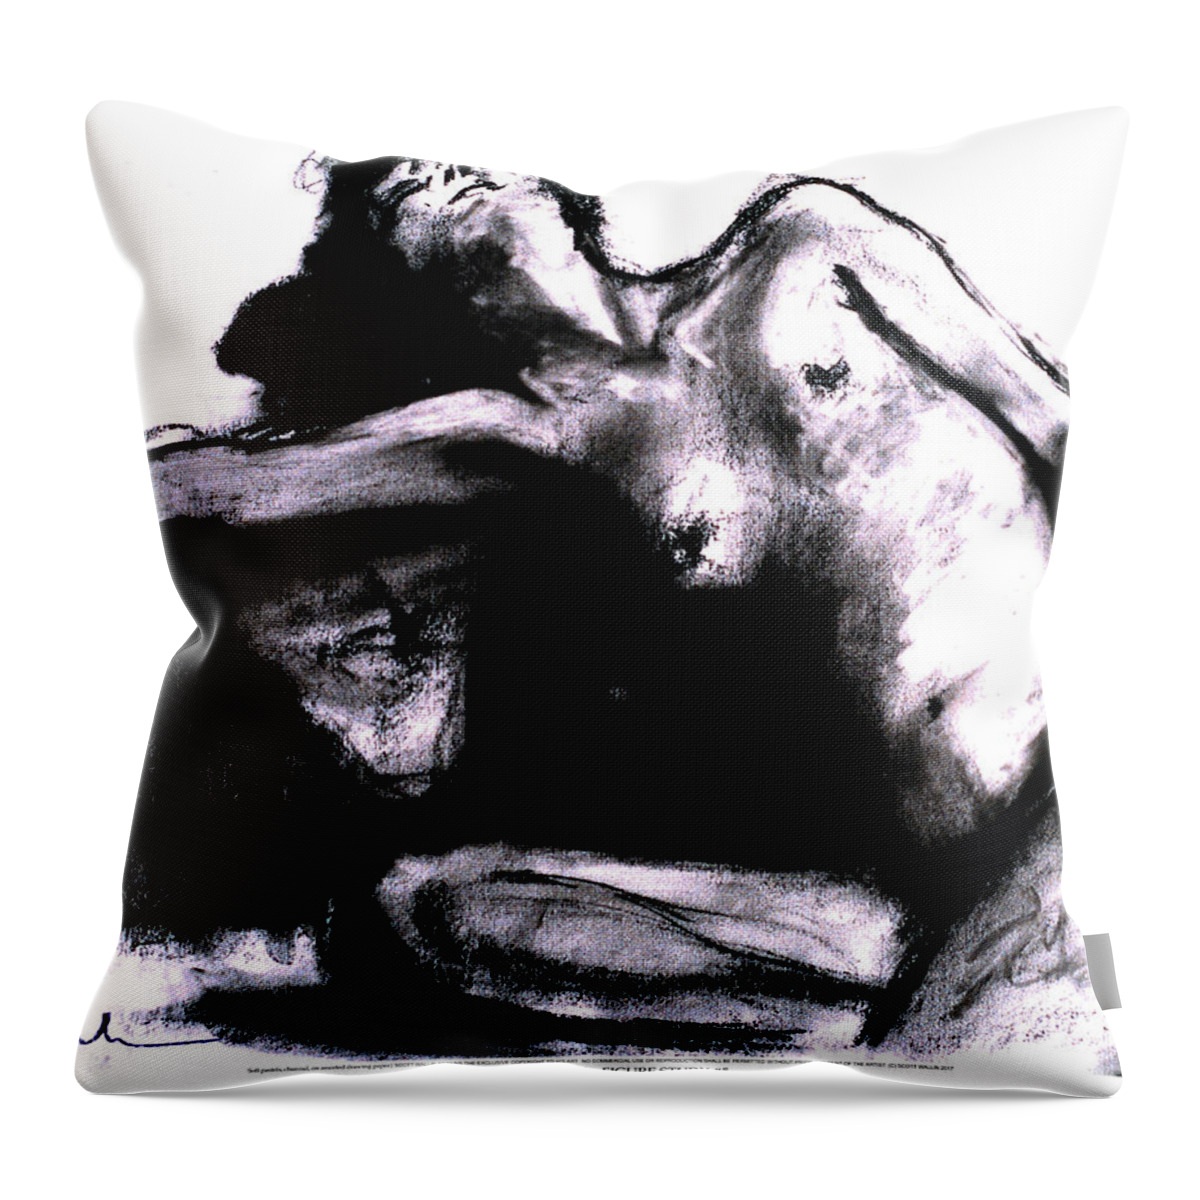 A Set Of Figure Studies Throw Pillow featuring the drawing Figure Study Five by Scott Wallin